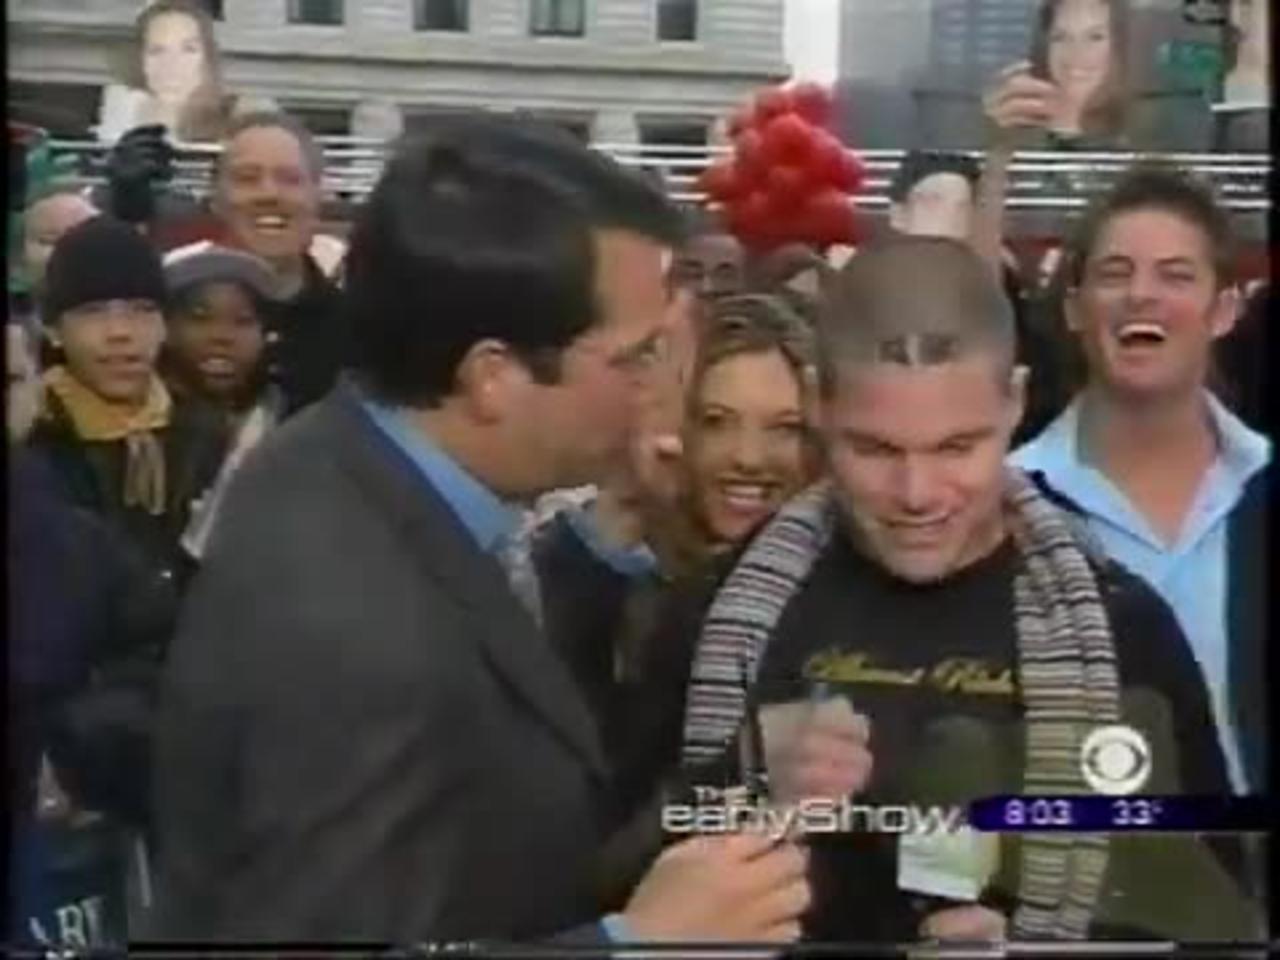 February 9, 2005 - 'Early Show' (Partial)